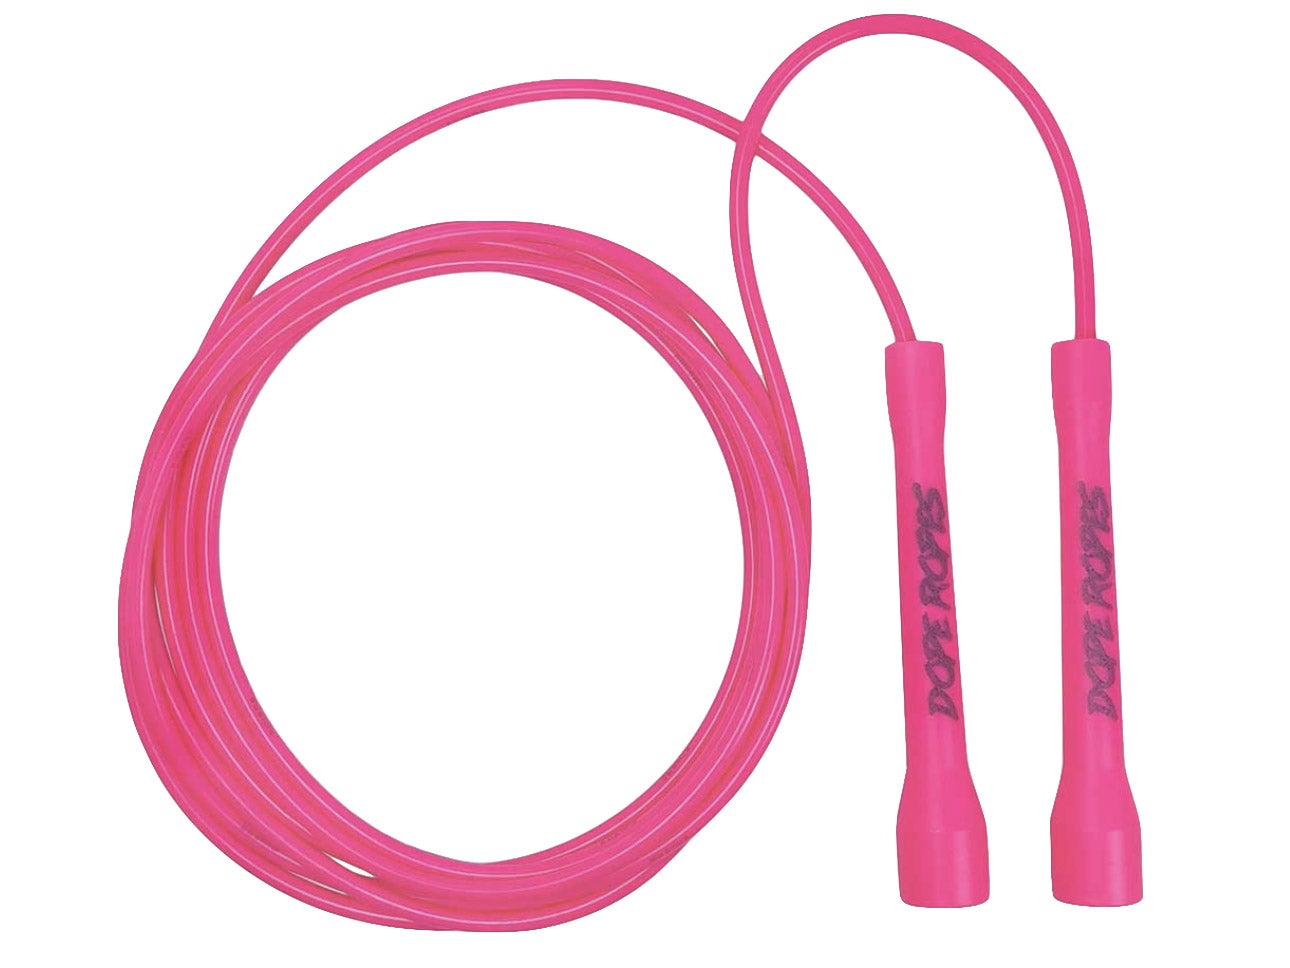 Skipping Rope Digital Counter Smart Calorie Gym Fitness Sports Speed Jumping UK 